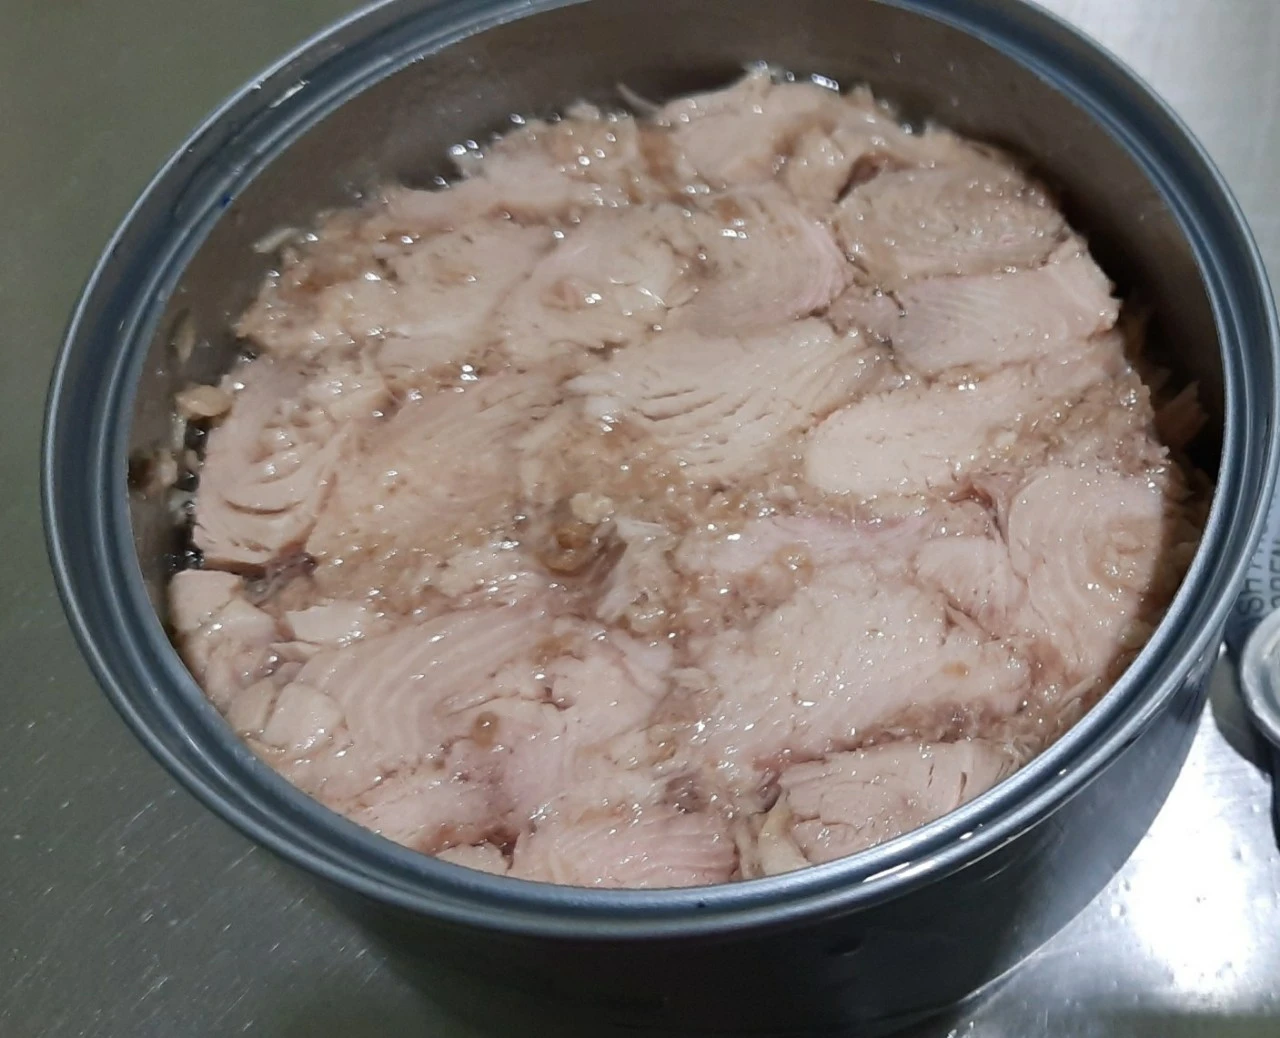 Canned Fish